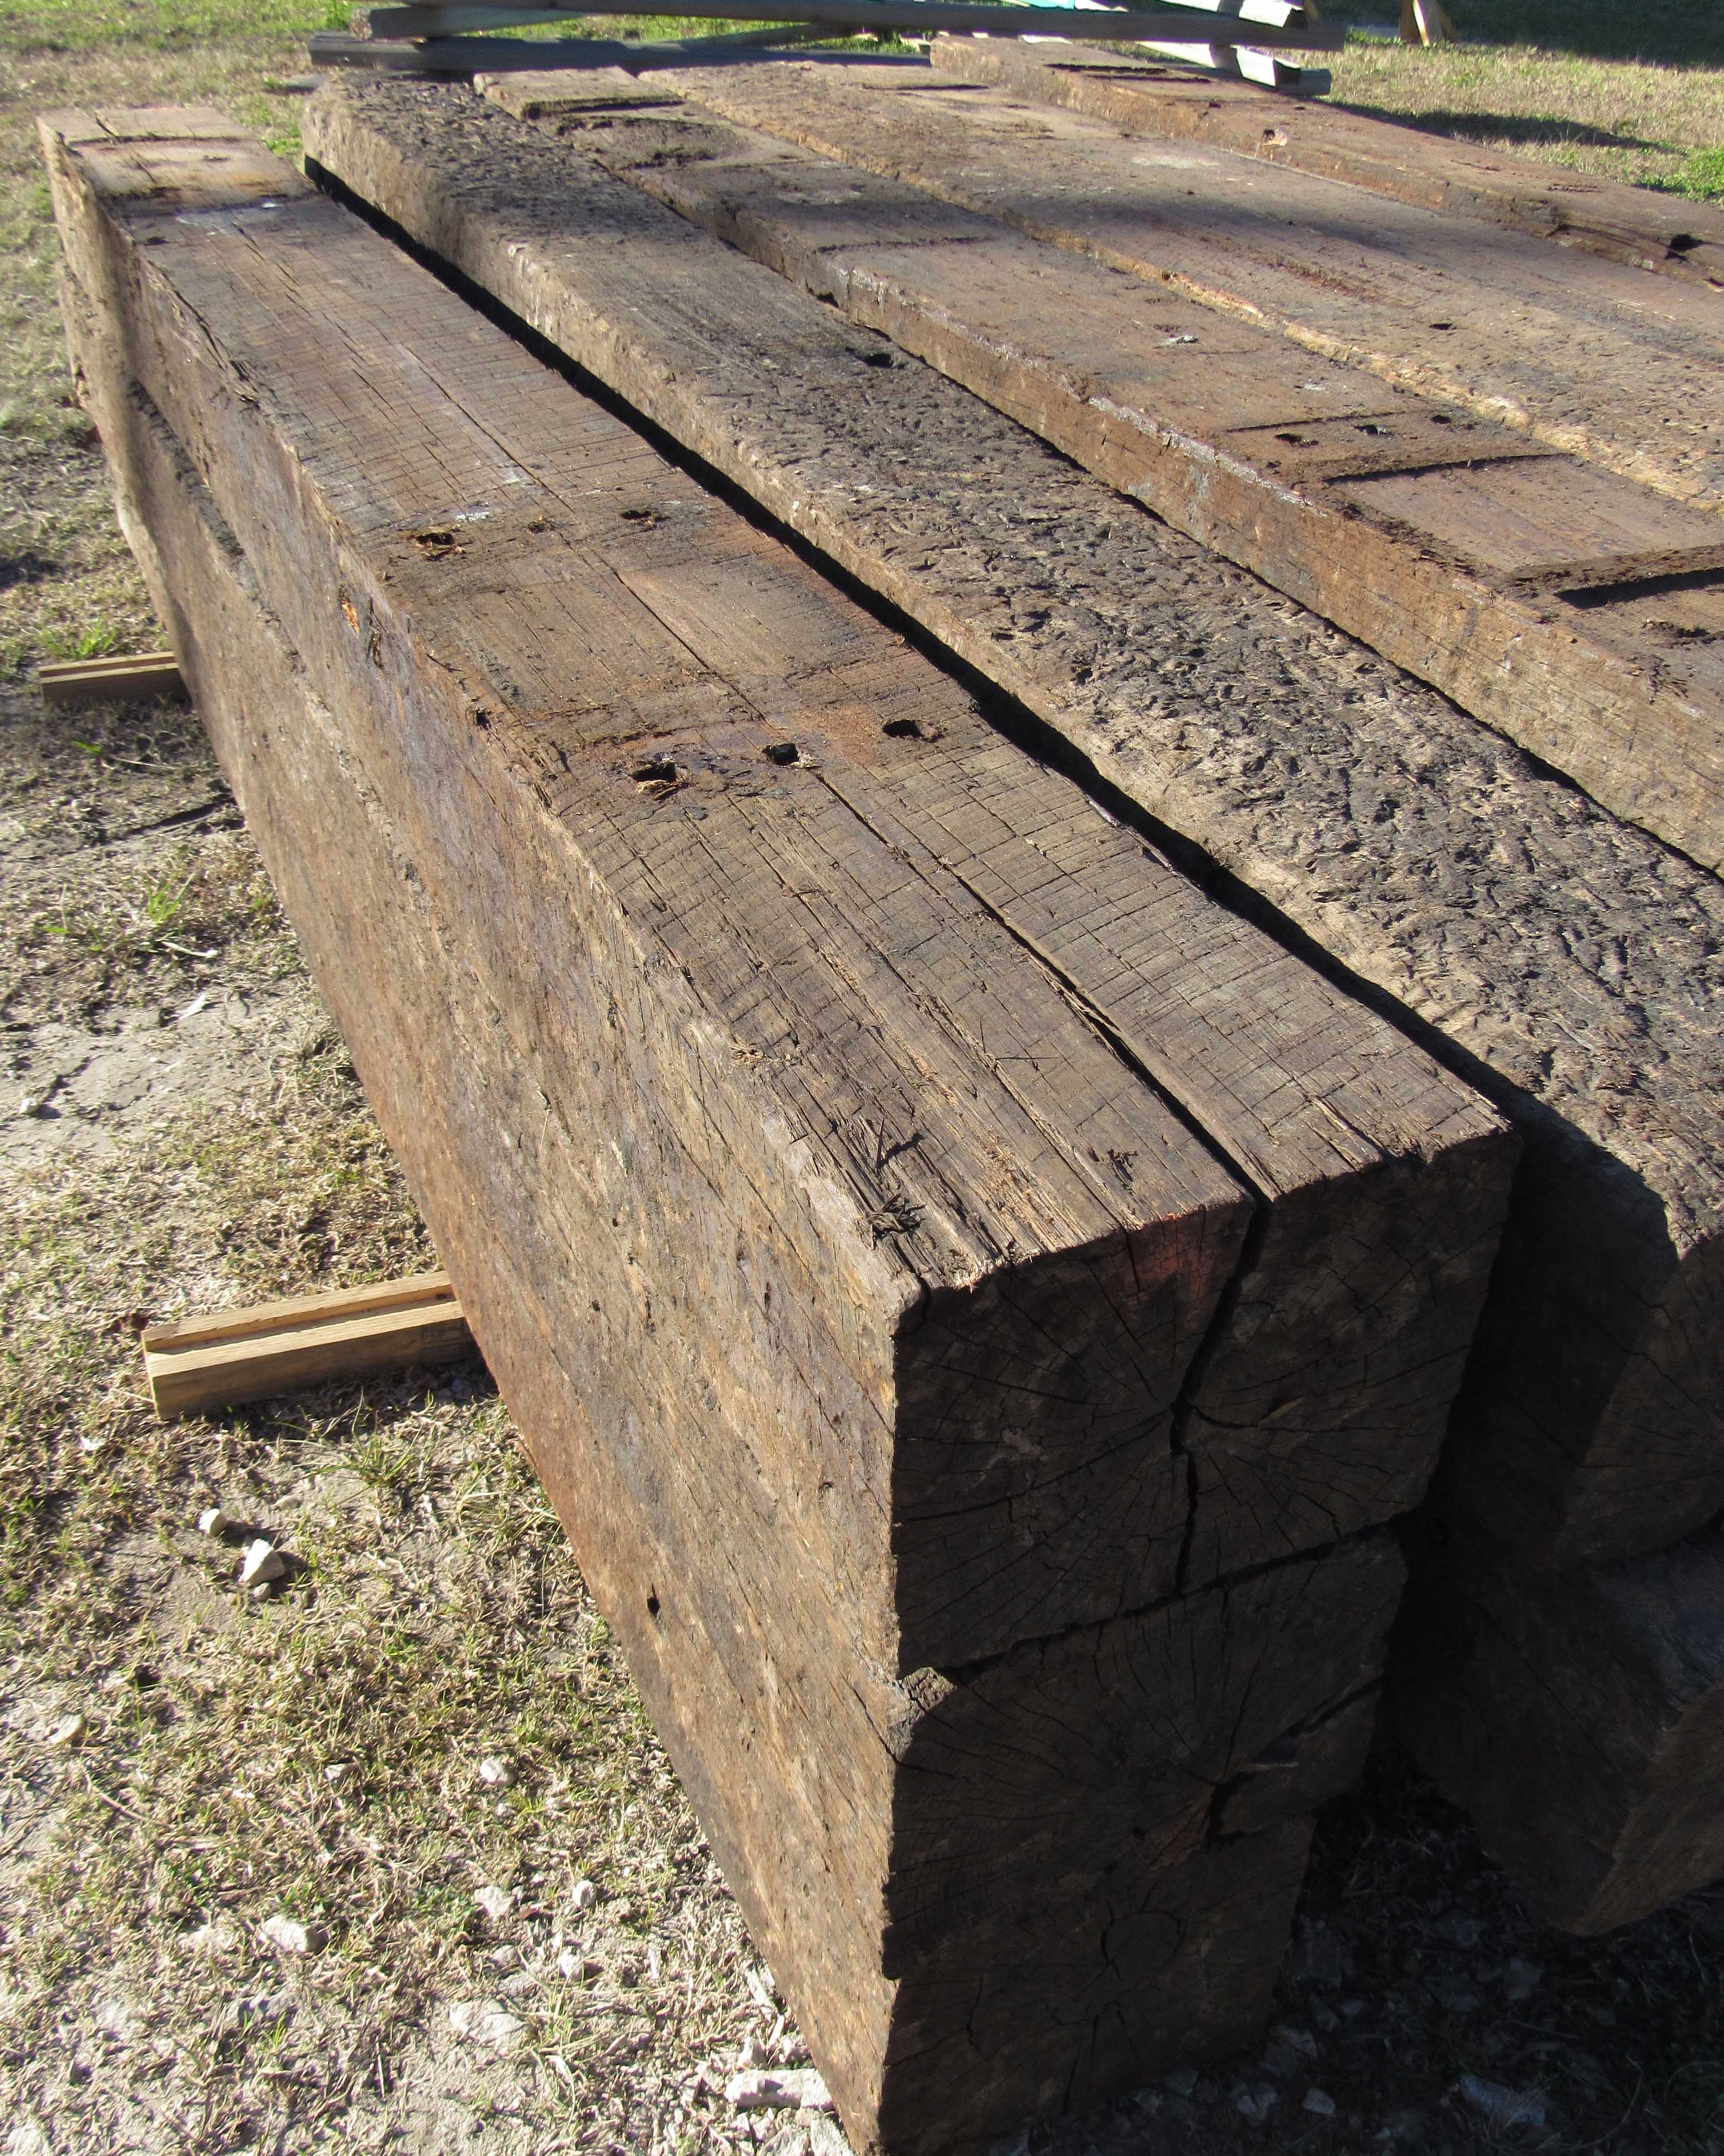 Used 1 Railroad Ties Capitol City Lumber, Is Railroad Ties Good For Garden